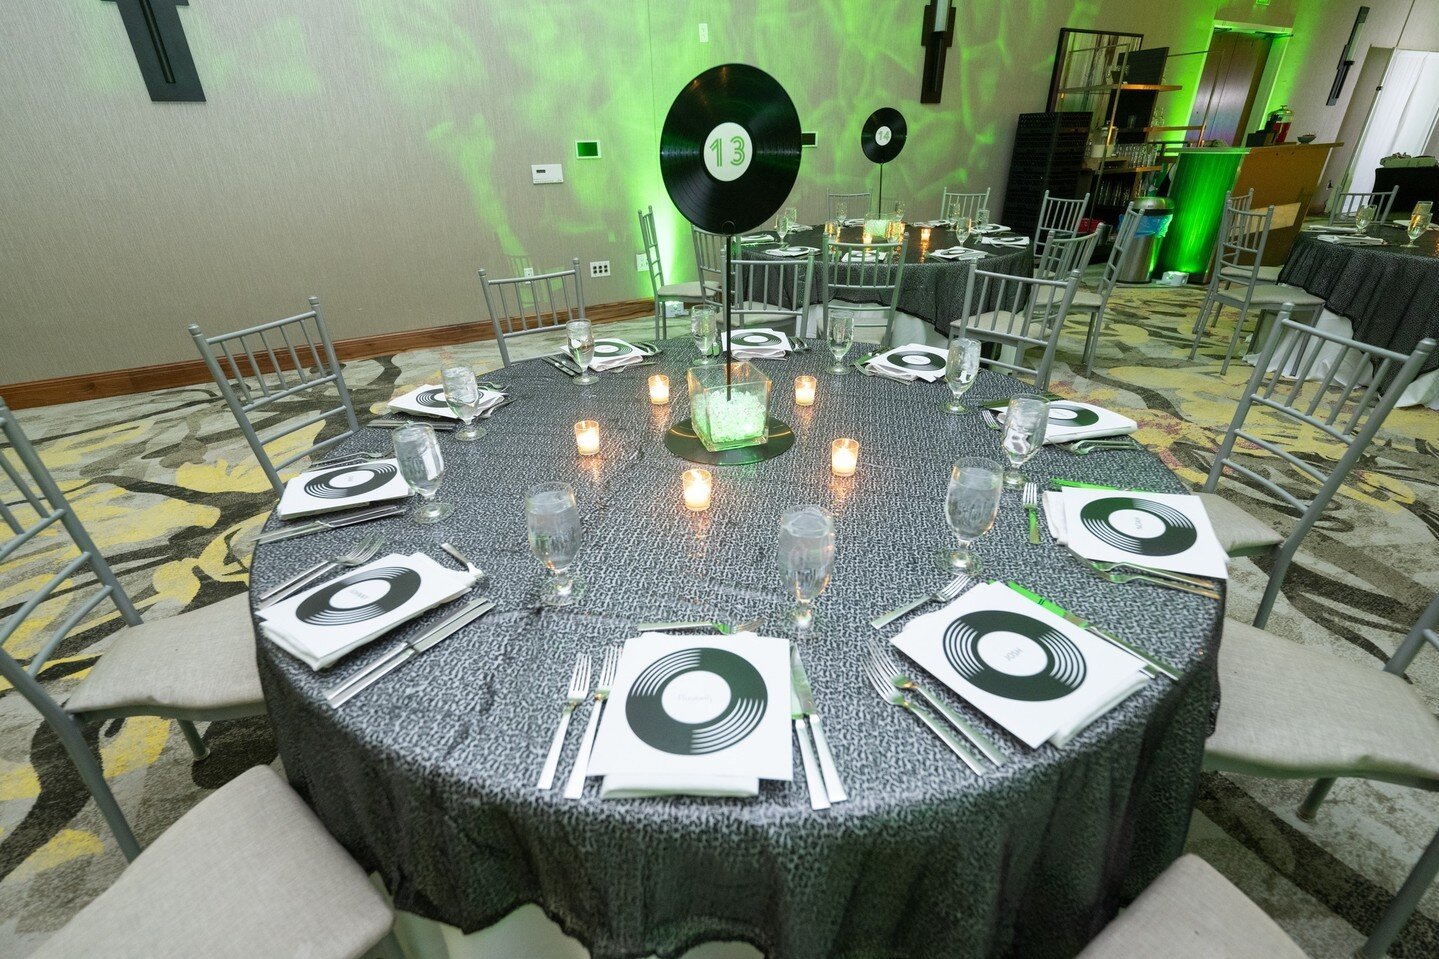 Make your child's Bar/Bat Mitzvah unforgettable with minimal stress. Our expert event team and flexible catering options will bring your vision to life effortlessly, letting your child's personality shine bright! 🎵👞💚

DJ and Entertainment: @xtreme